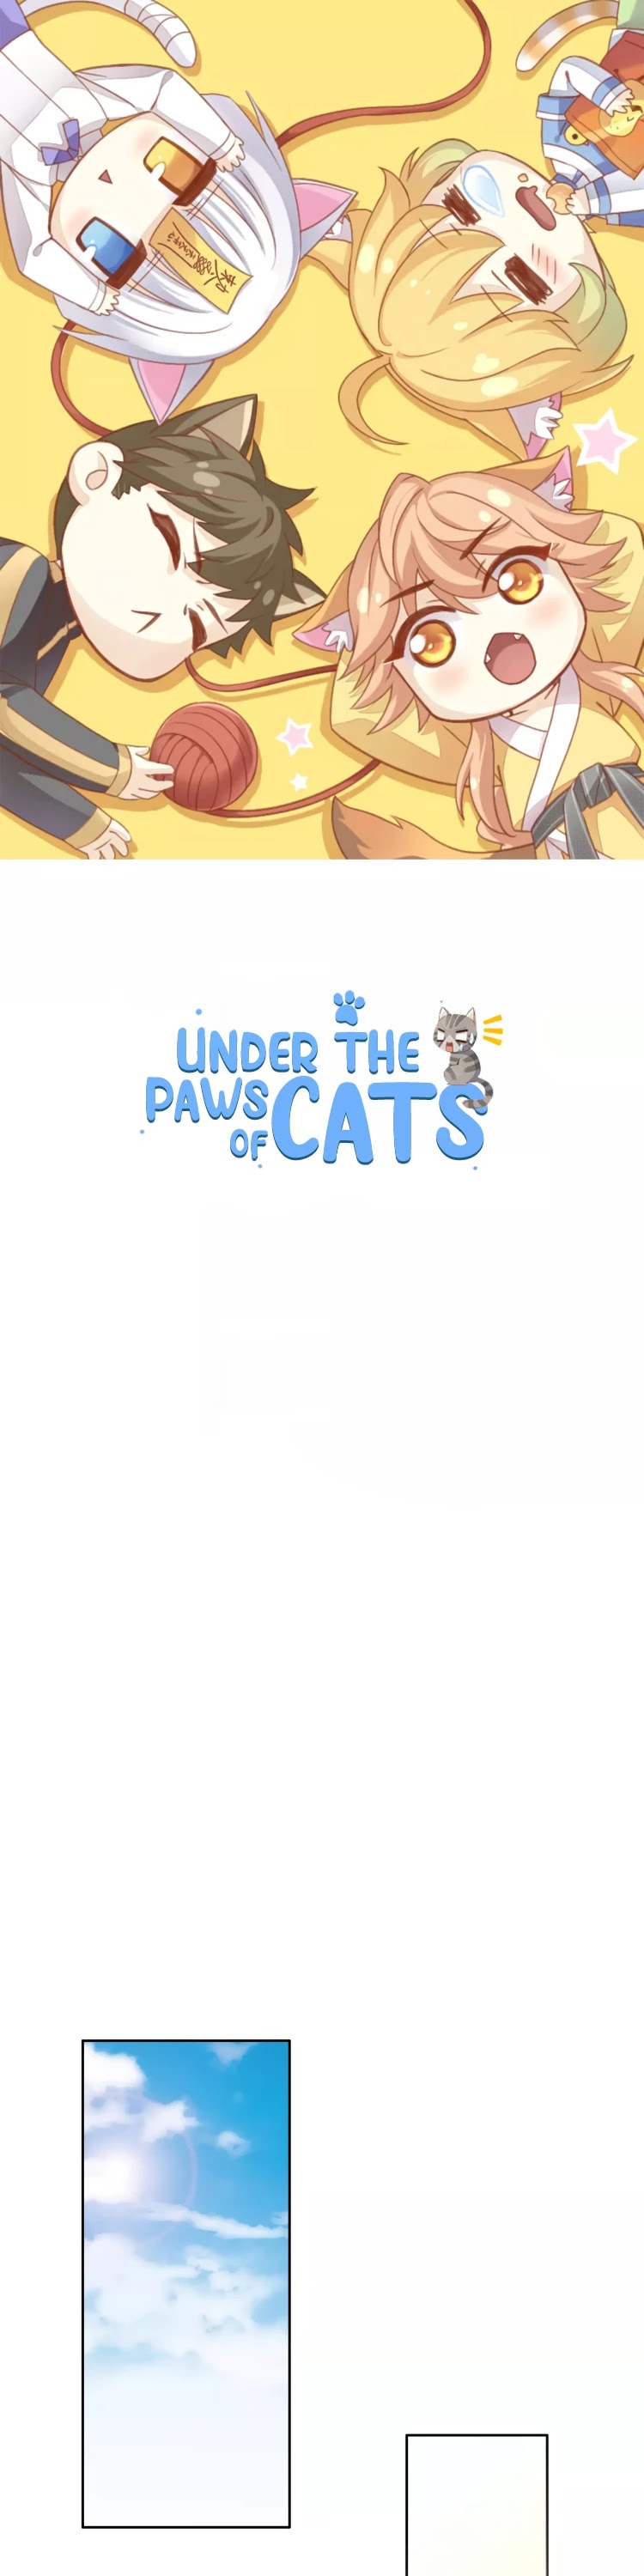 Under The Paws Of Cats - Page 2